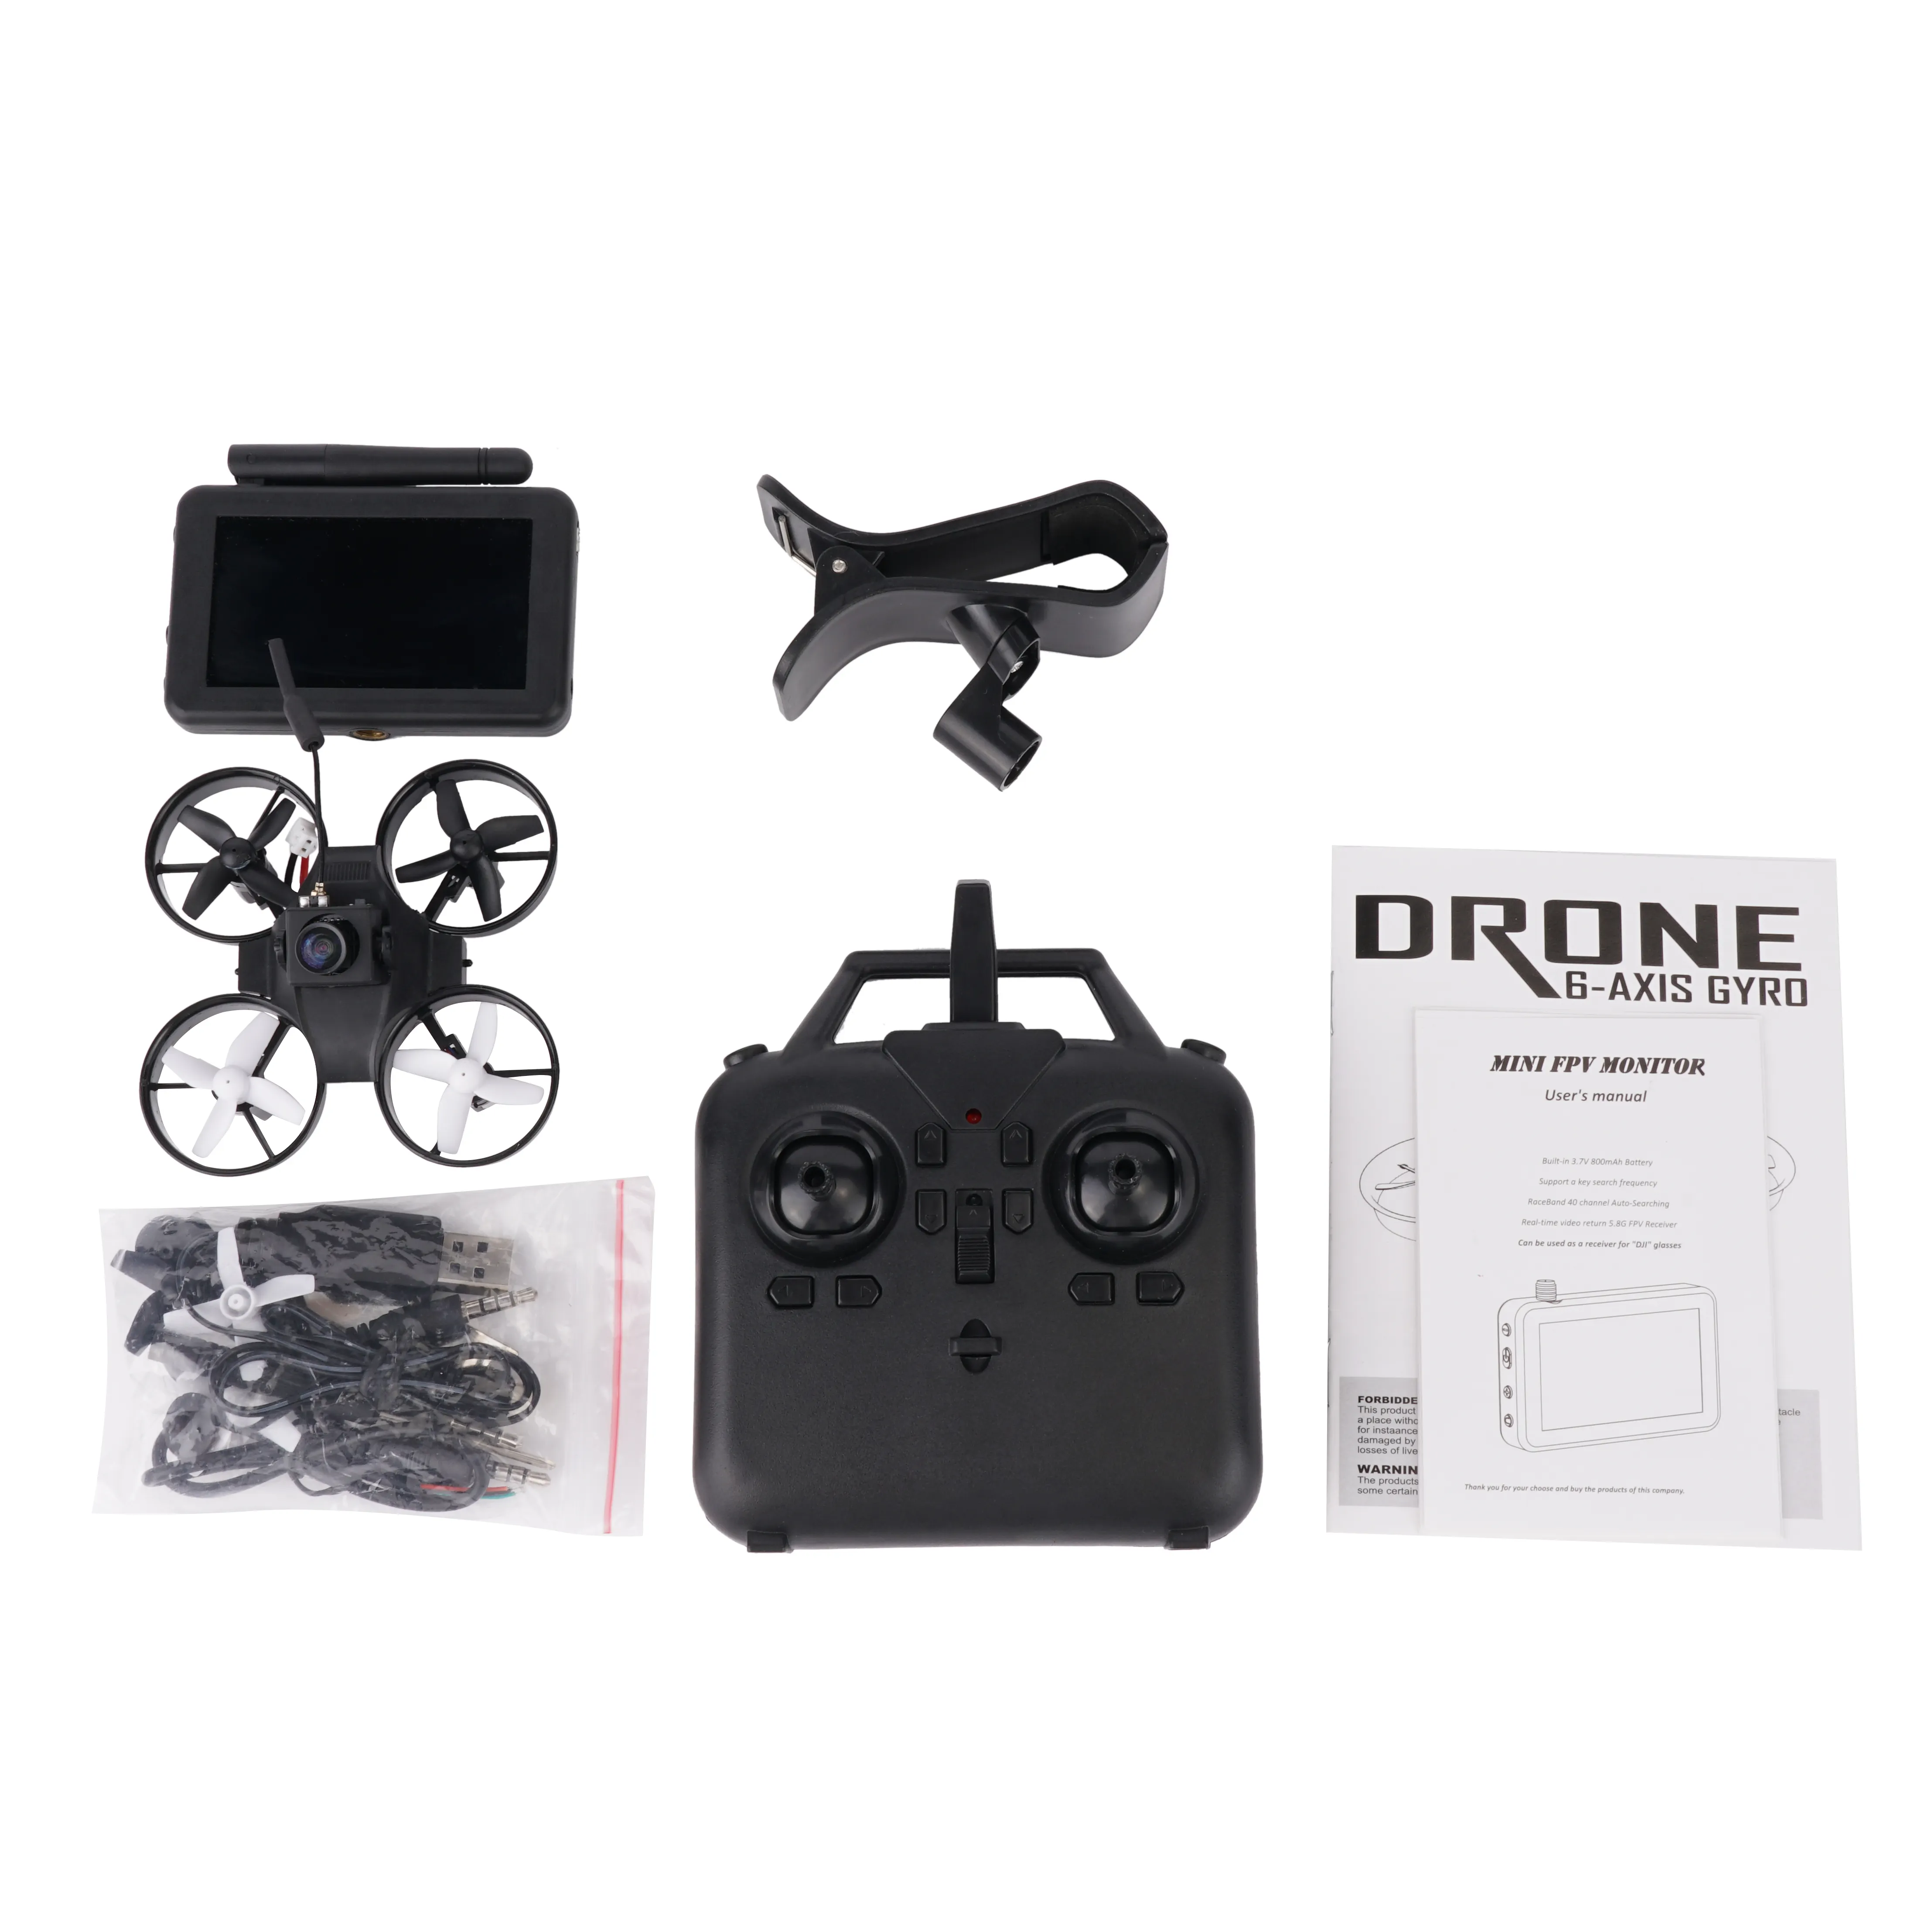 Factory Outlet RTF 6 axis Gyro T02 Mini FPV camera Racing drone with remote controller and handheld screen 5.8G FPV drone